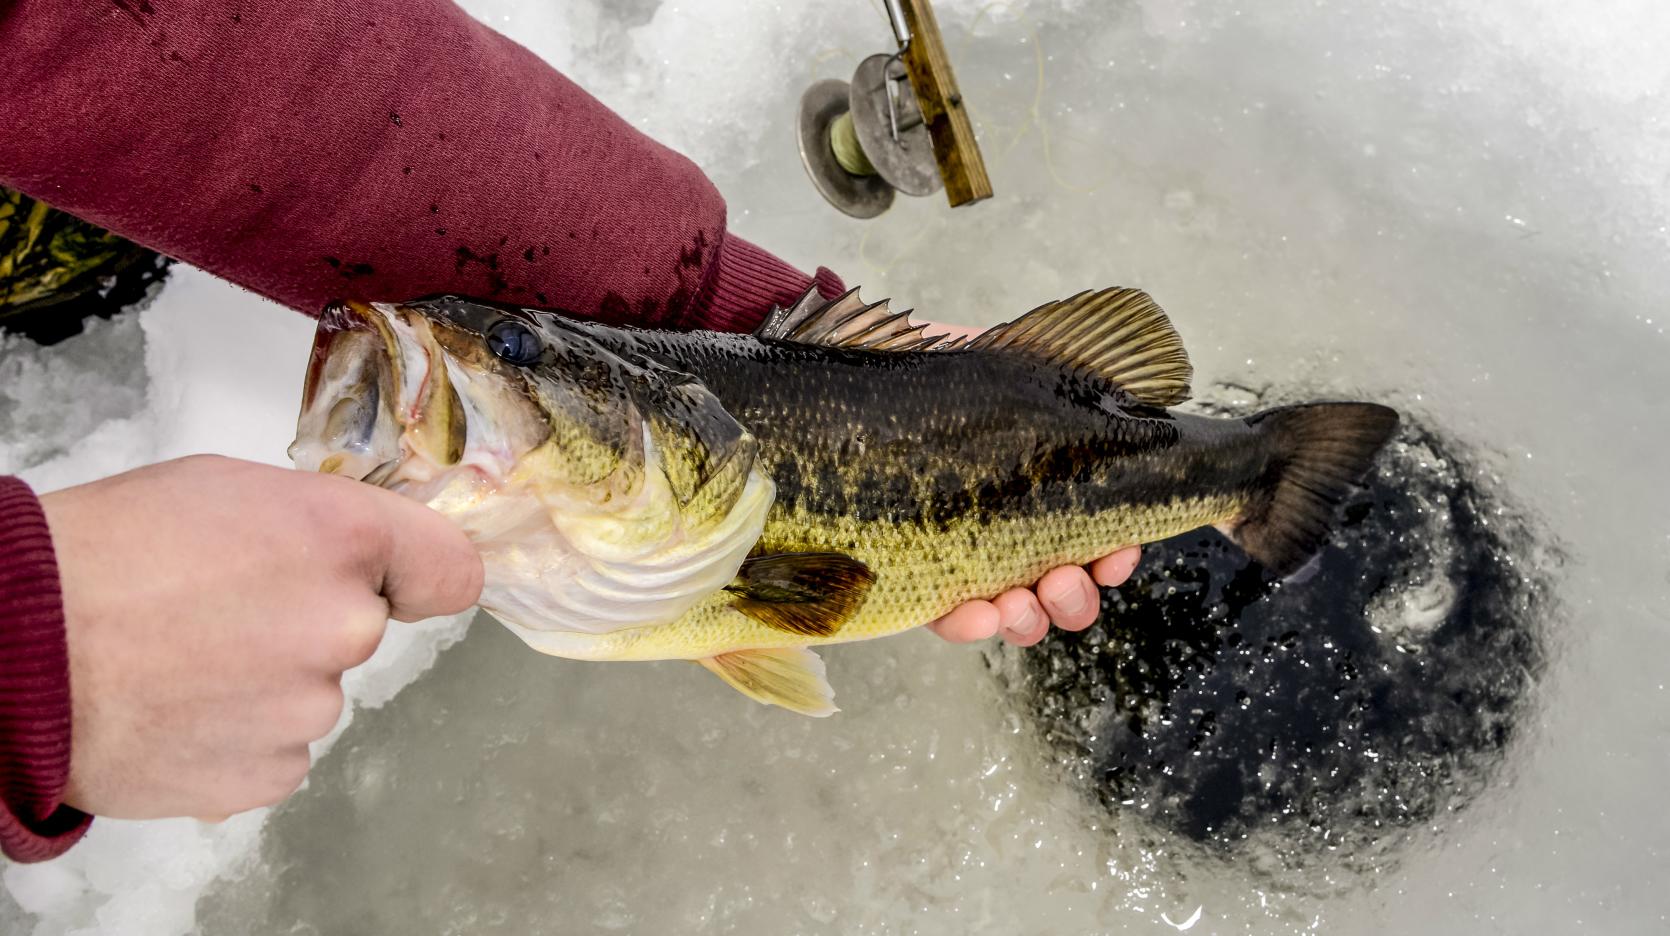 Ice fishing hole with bass